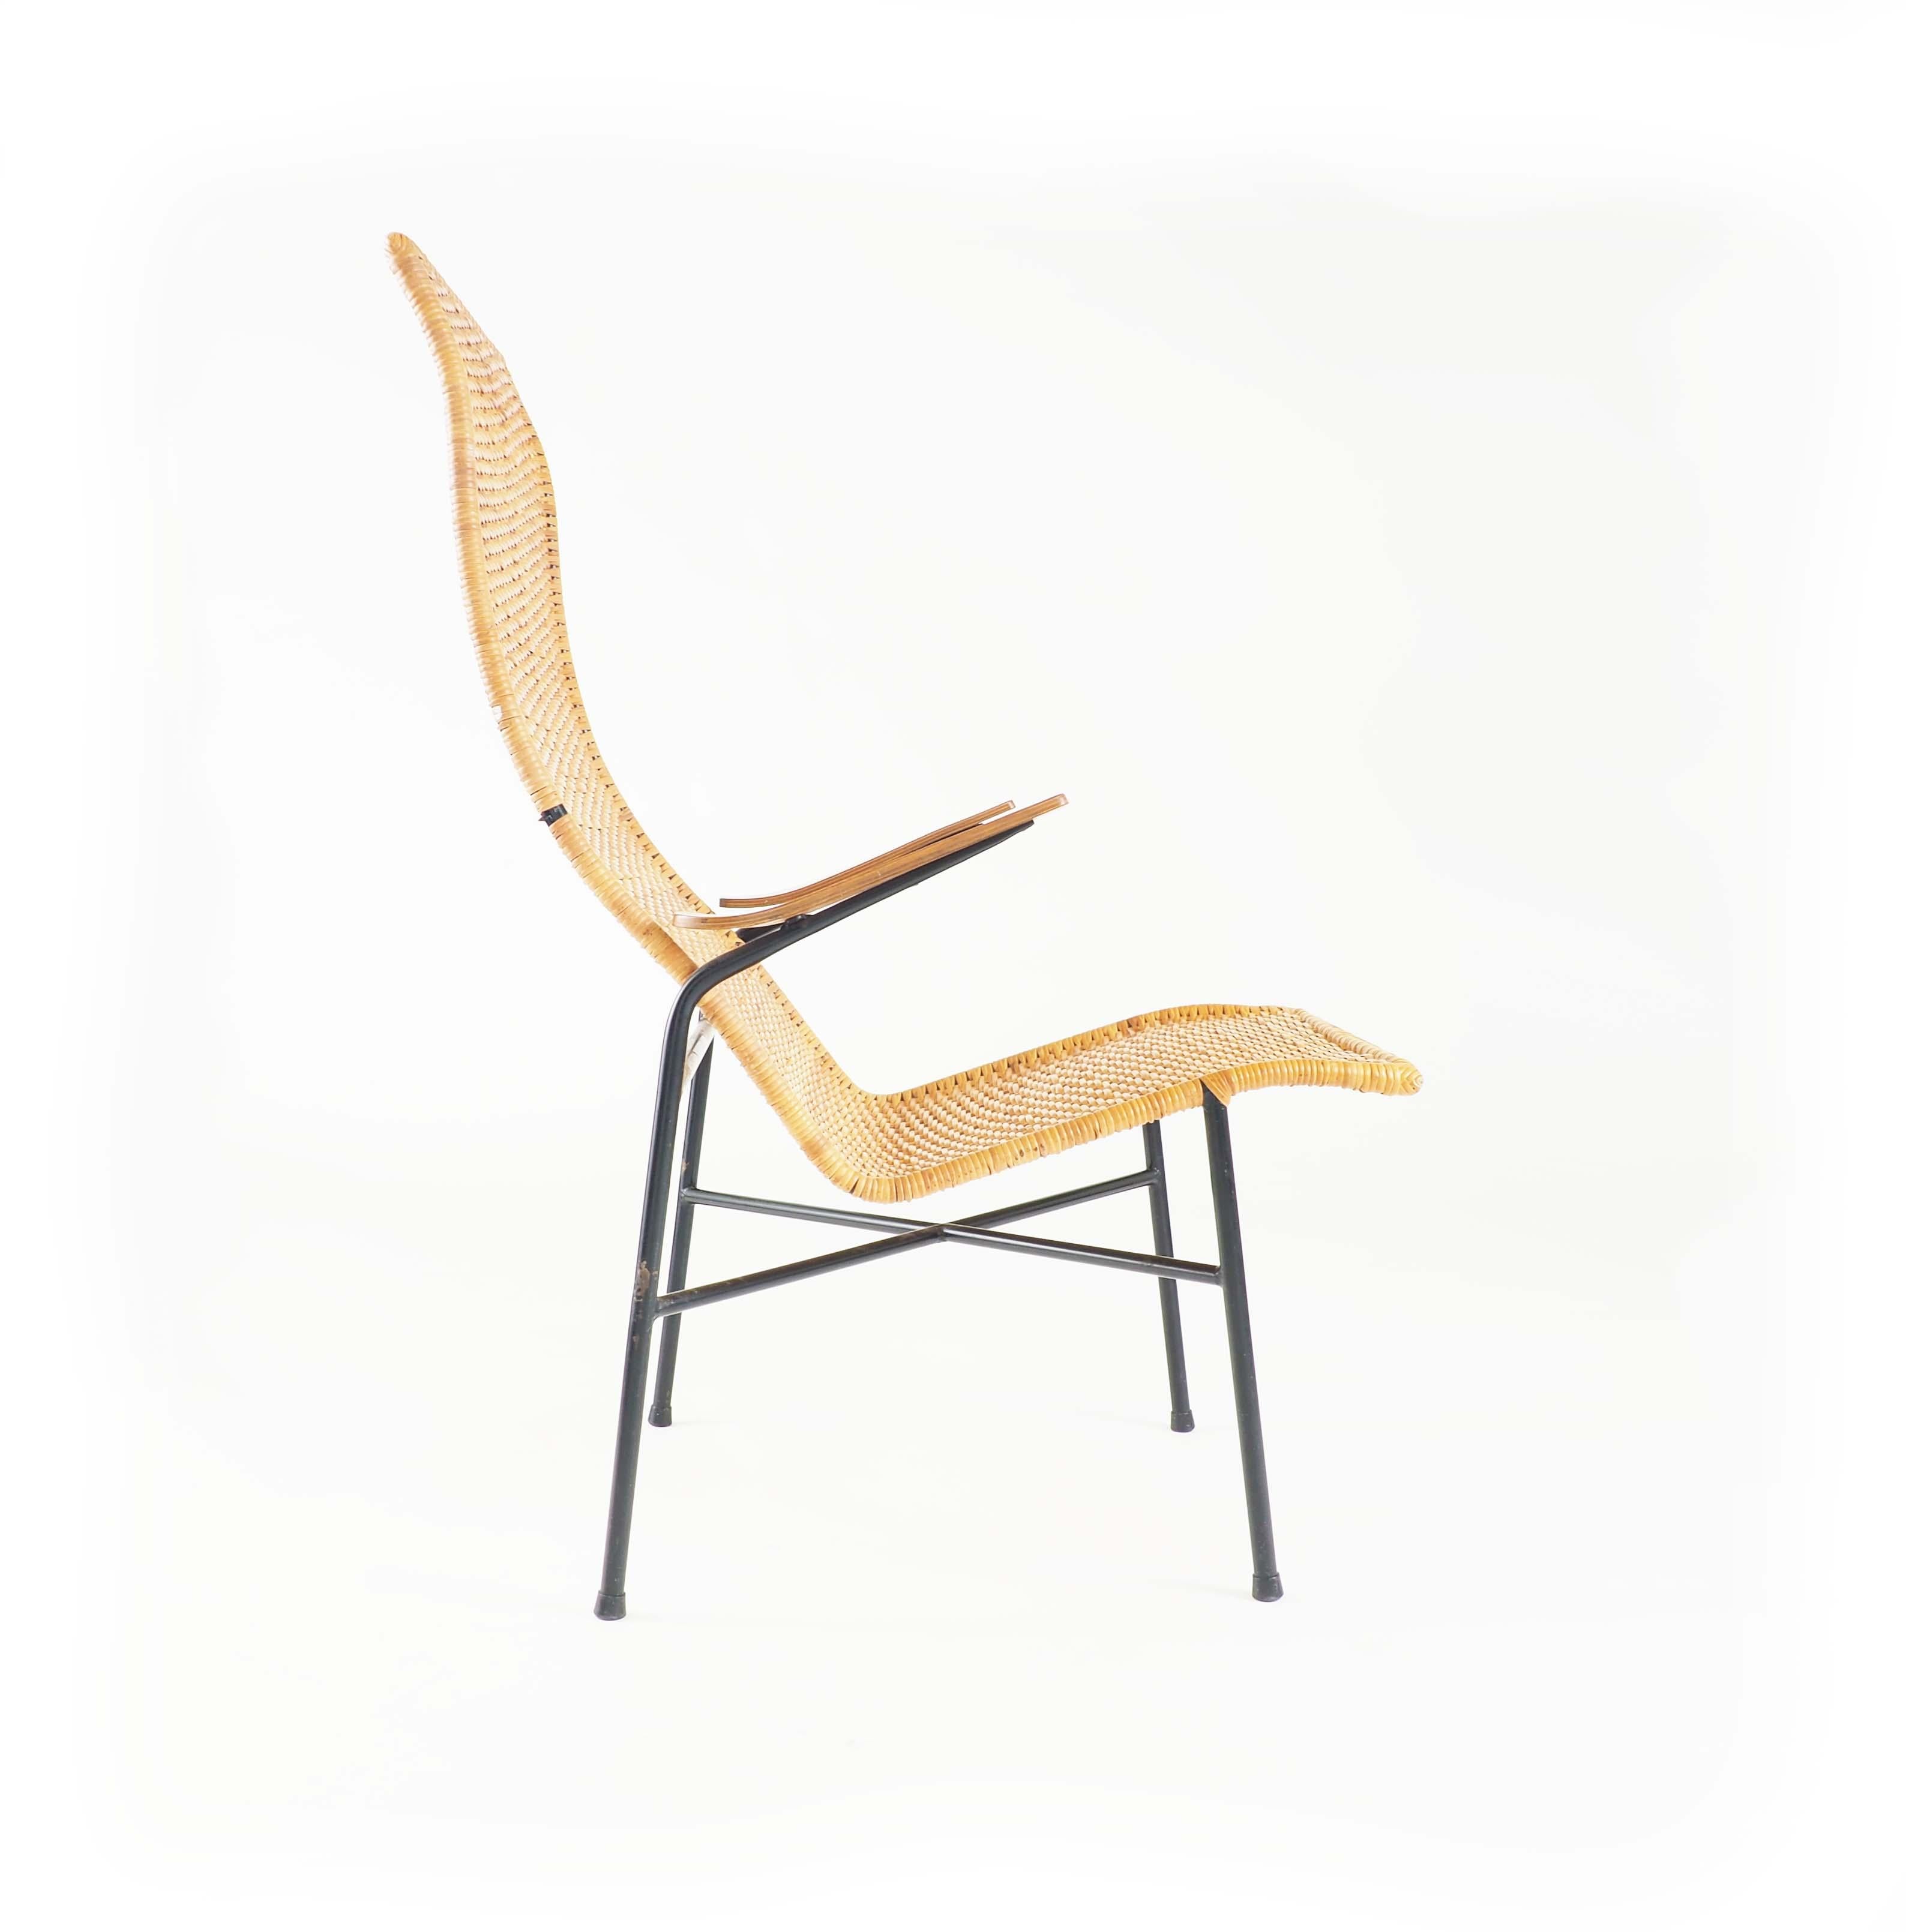 Mid-20th Century Lounge Chair in Rattan, Teak and Metal For Sale